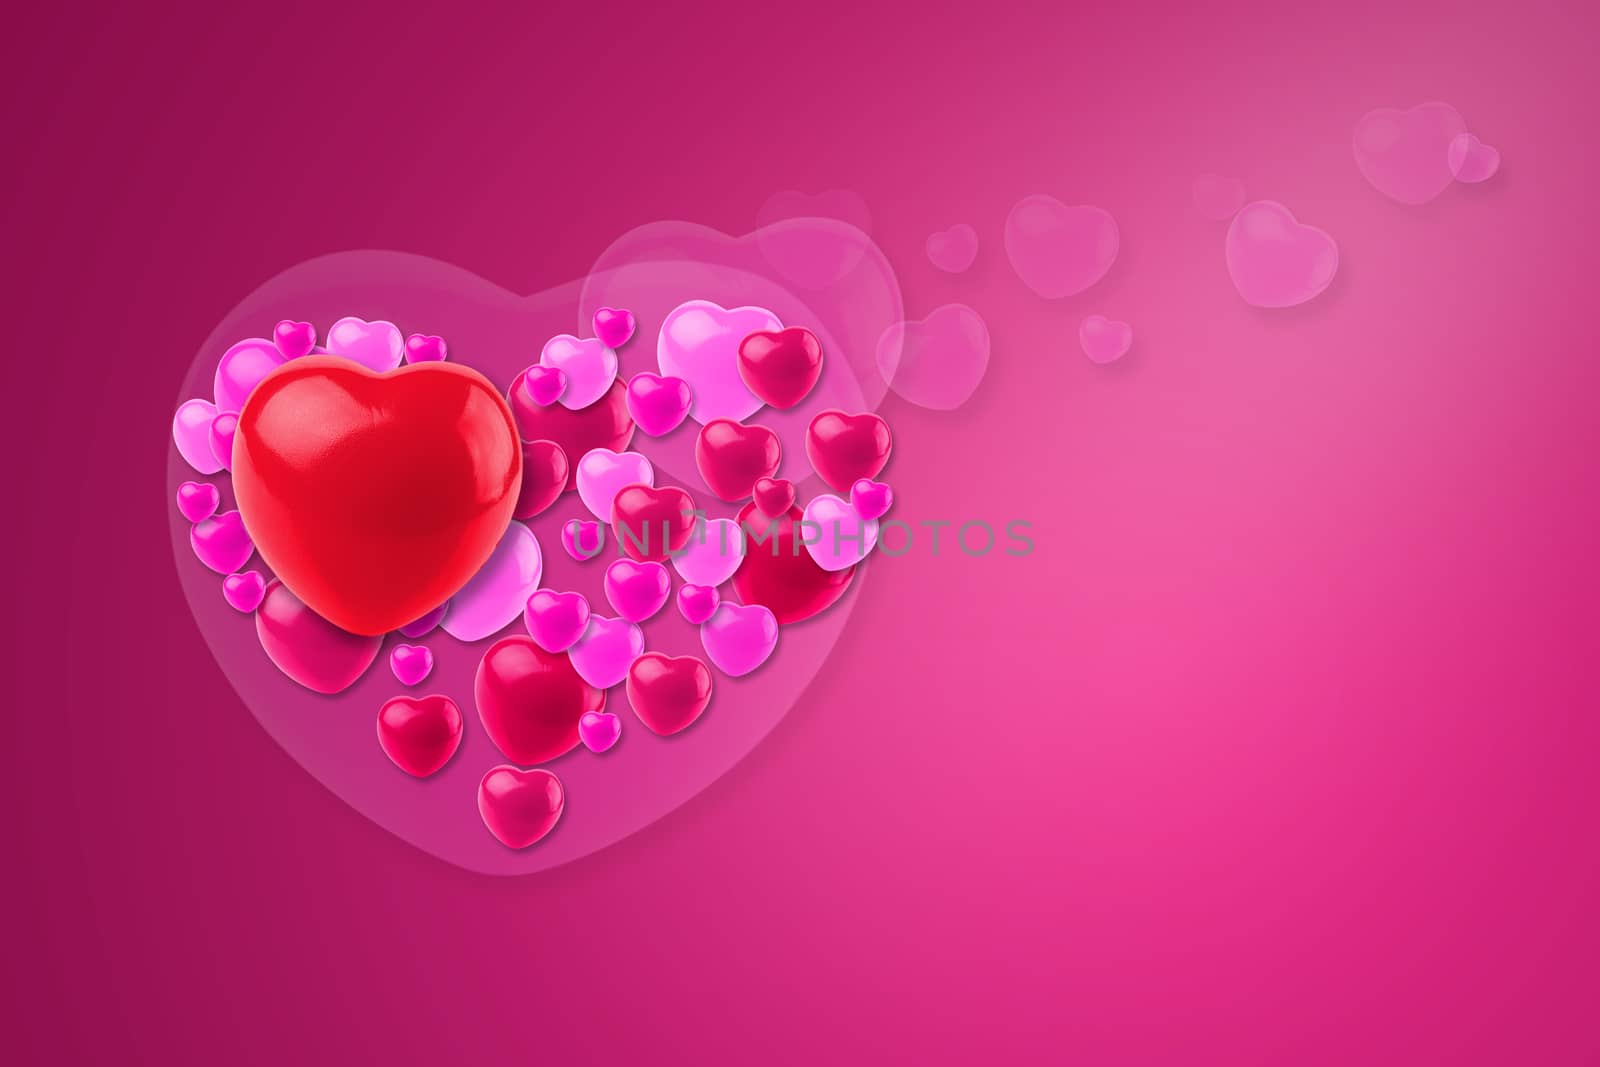 Red Hearts over red background. Valentines Day concept. by kaiskynet